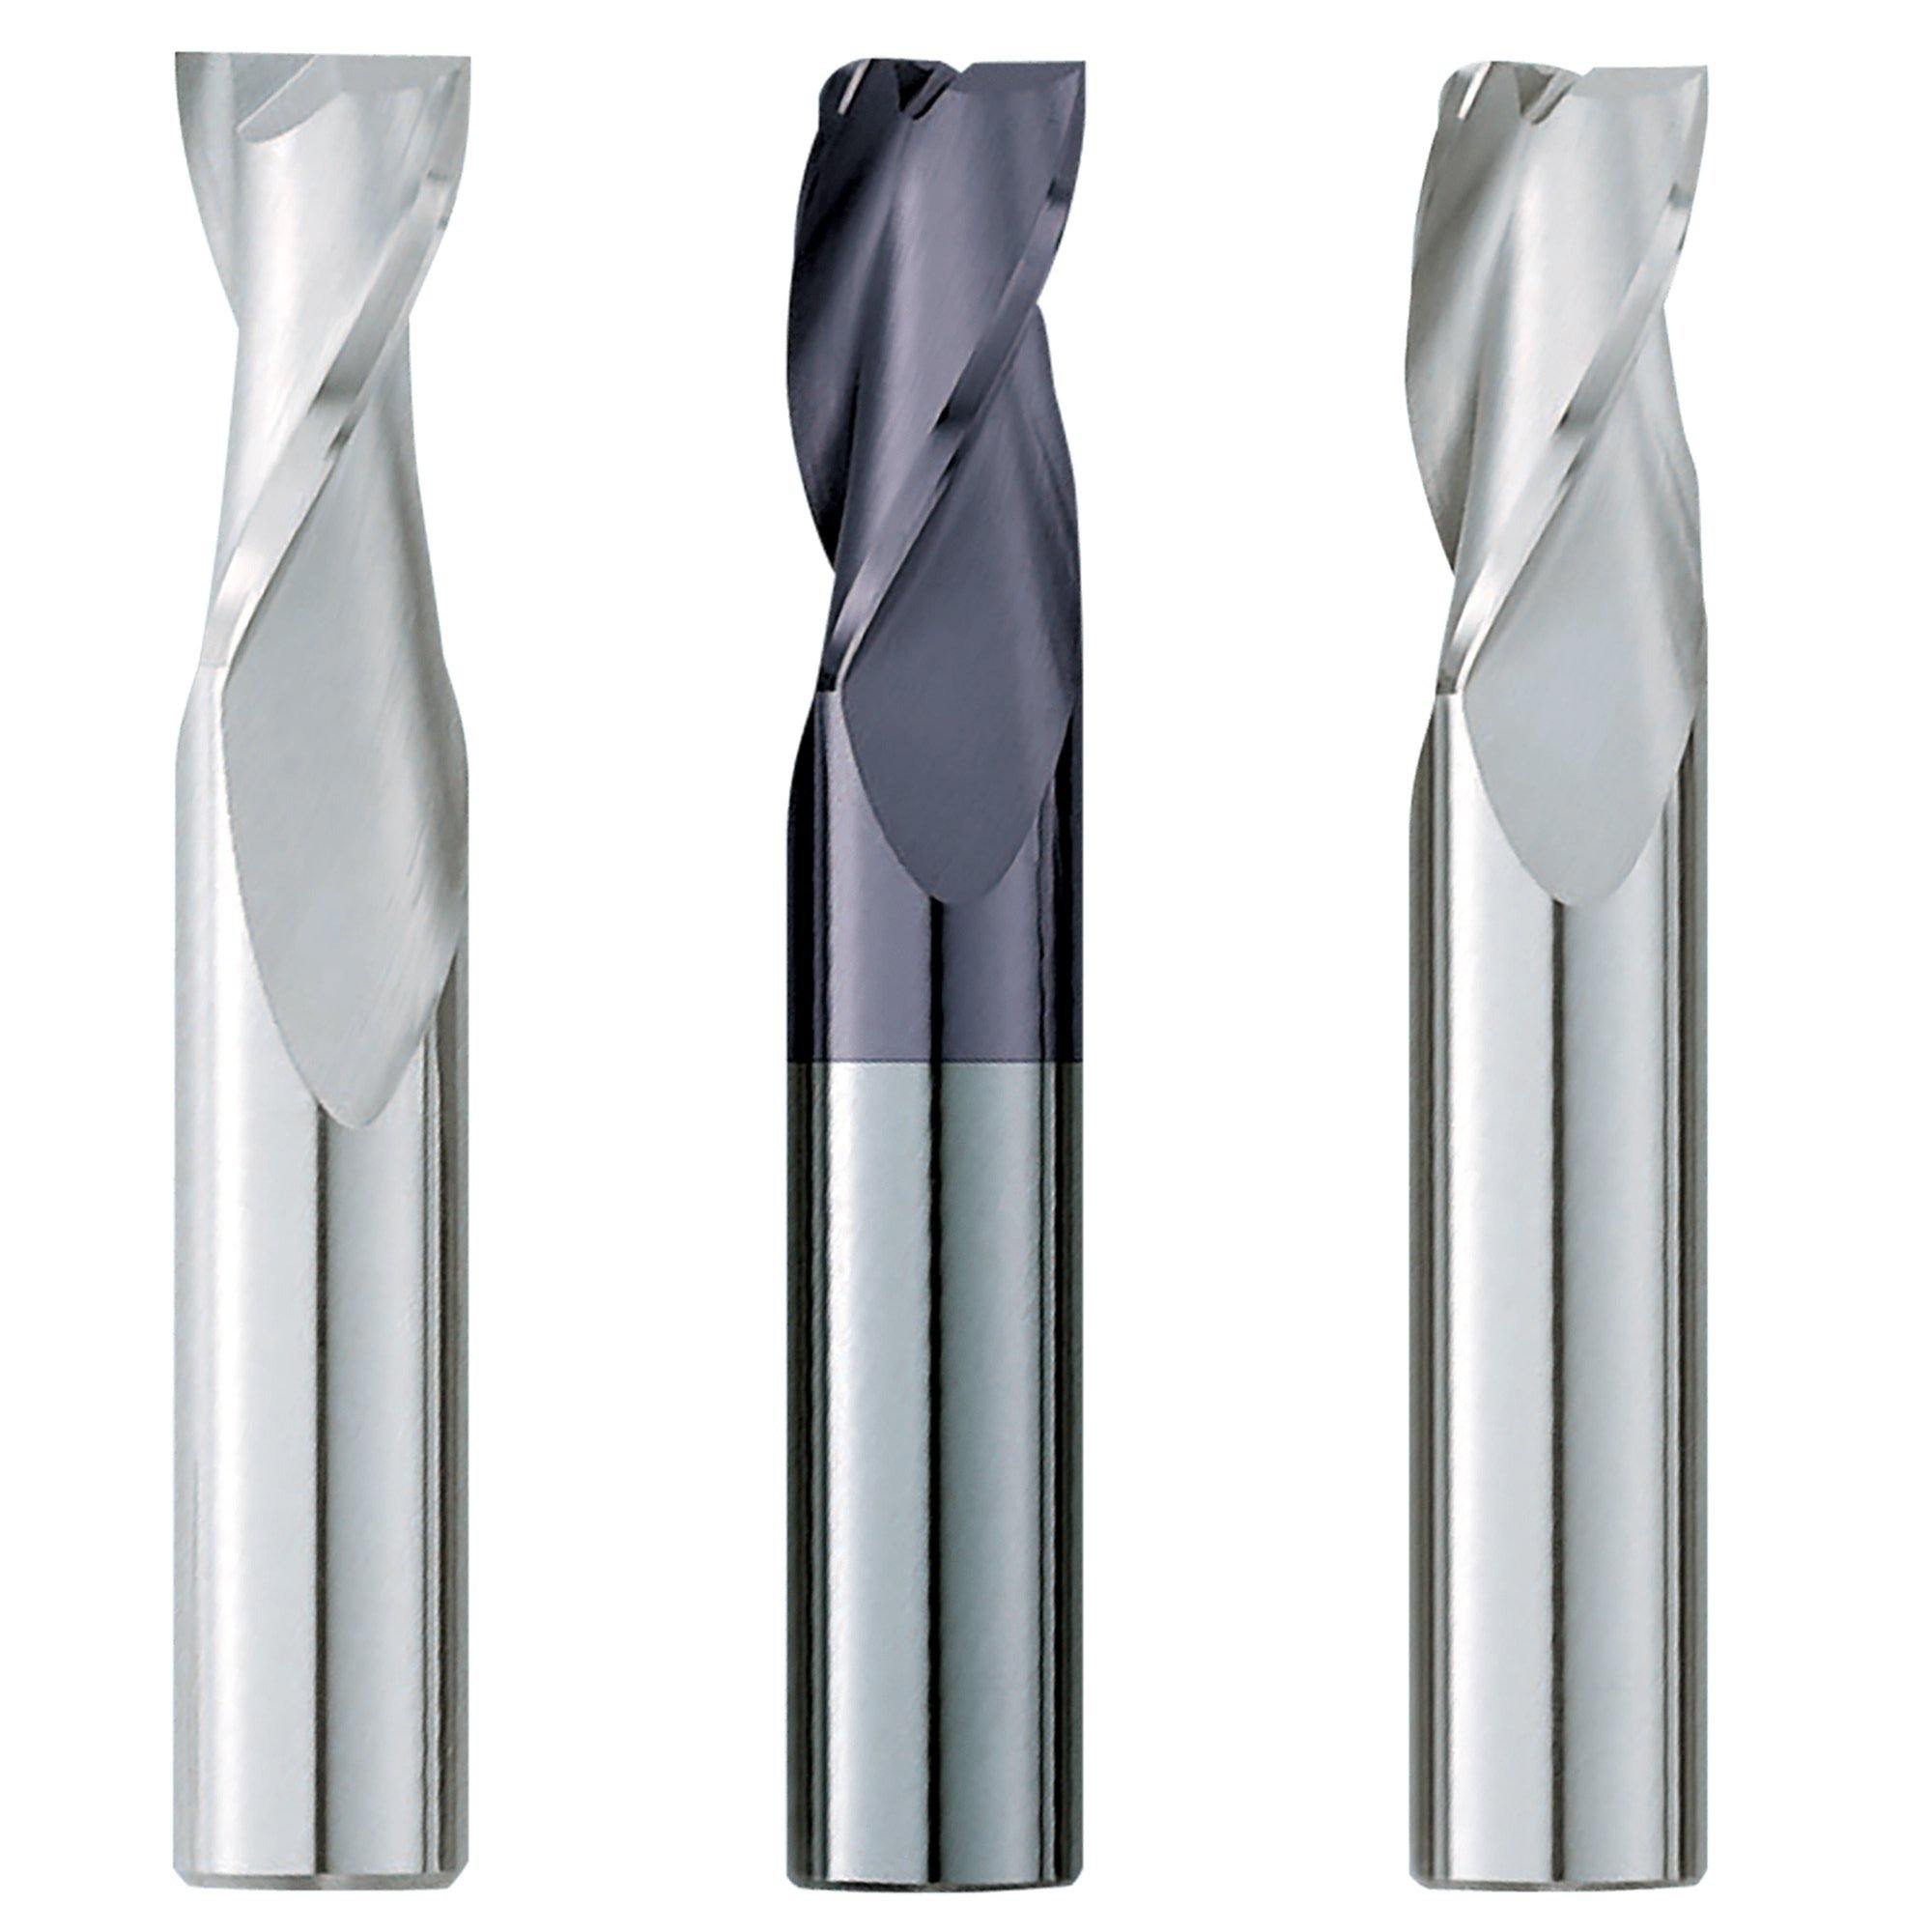 (3 Pack) 7/8" x 1-1/2" x 4" Standard Square Carbide End Mill - The End Mill Store 